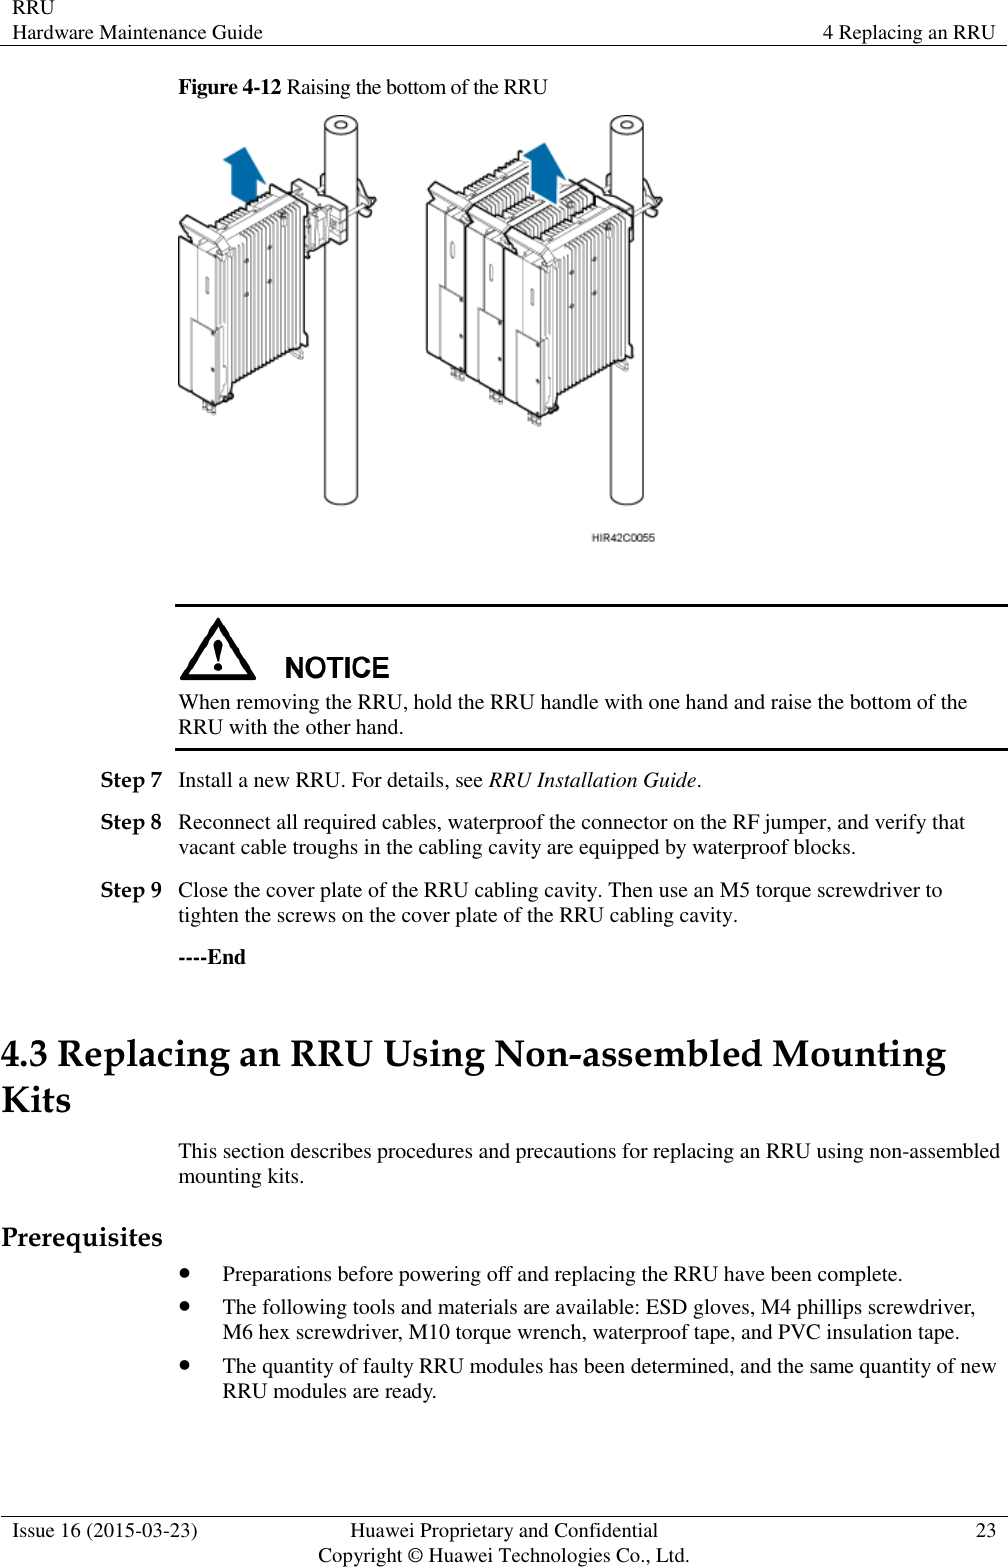 RRU Hardware Maintenance Guide 4 Replacing an RRU  Issue 16 (2015-03-23) Huawei Proprietary and Confidential                                     Copyright © Huawei Technologies Co., Ltd. 23  Figure 4-12 Raising the bottom of the RRU    When removing the RRU, hold the RRU handle with one hand and raise the bottom of the RRU with the other hand. Step 7 Install a new RRU. For details, see RRU Installation Guide. Step 8 Reconnect all required cables, waterproof the connector on the RF jumper, and verify that vacant cable troughs in the cabling cavity are equipped by waterproof blocks. Step 9 Close the cover plate of the RRU cabling cavity. Then use an M5 torque screwdriver to tighten the screws on the cover plate of the RRU cabling cavity. ----End 4.3 Replacing an RRU Using Non-assembled Mounting Kits This section describes procedures and precautions for replacing an RRU using non-assembled mounting kits. Prerequisites  Preparations before powering off and replacing the RRU have been complete.  The following tools and materials are available: ESD gloves, M4 phillips screwdriver, M6 hex screwdriver, M10 torque wrench, waterproof tape, and PVC insulation tape.  The quantity of faulty RRU modules has been determined, and the same quantity of new RRU modules are ready. 